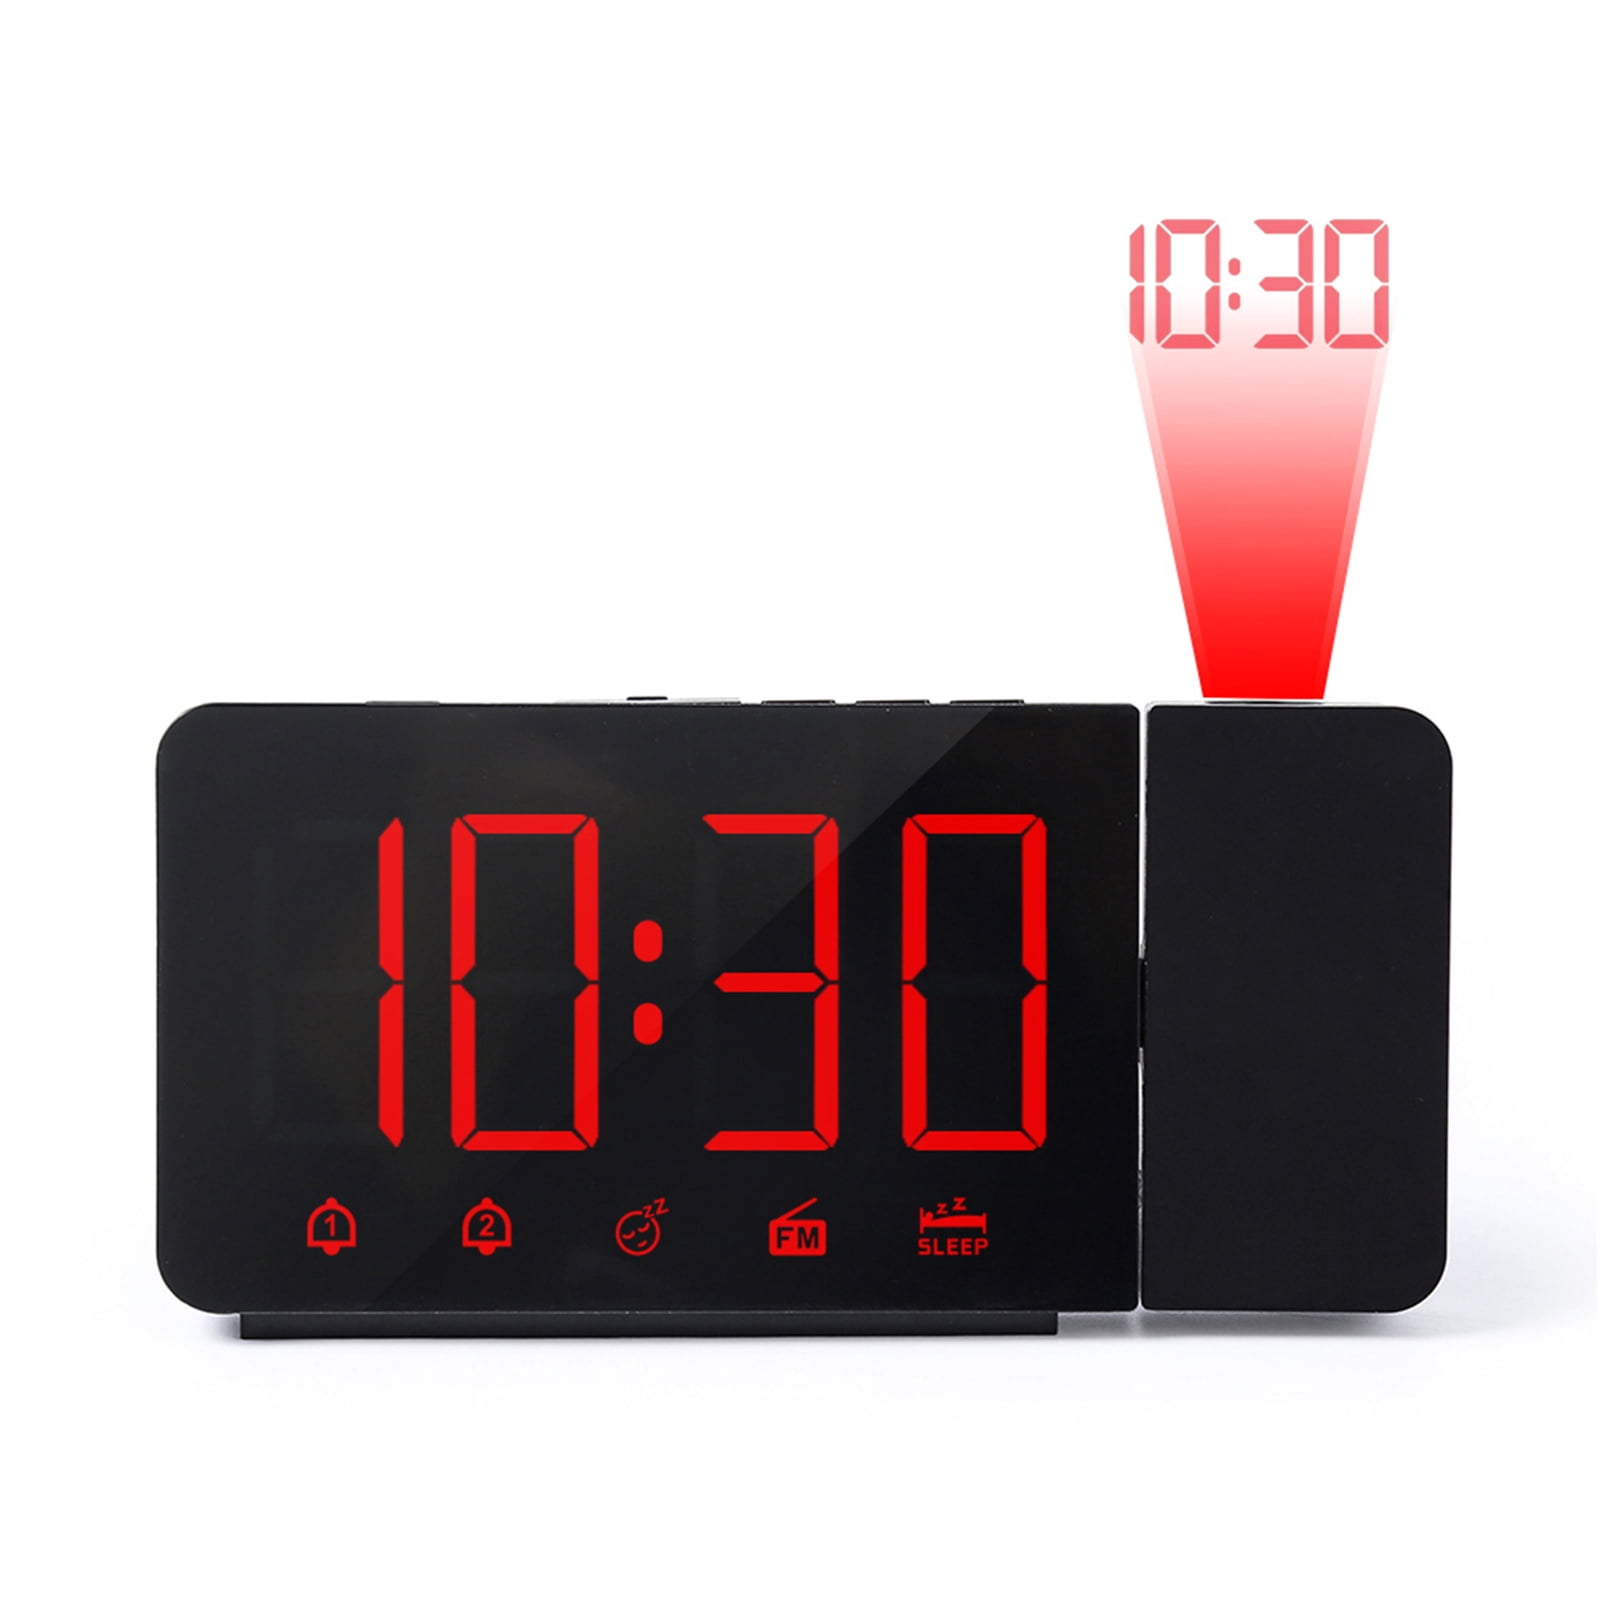 180° Projector Dual Alarms Clock with Snooze Blue Light Projection Alarm Clock with FM Radio 0-100% Dimmer 5 Alarm Sounds with Sleep Timer 12/24H Setting for Bedroom, USB Charger Ports 